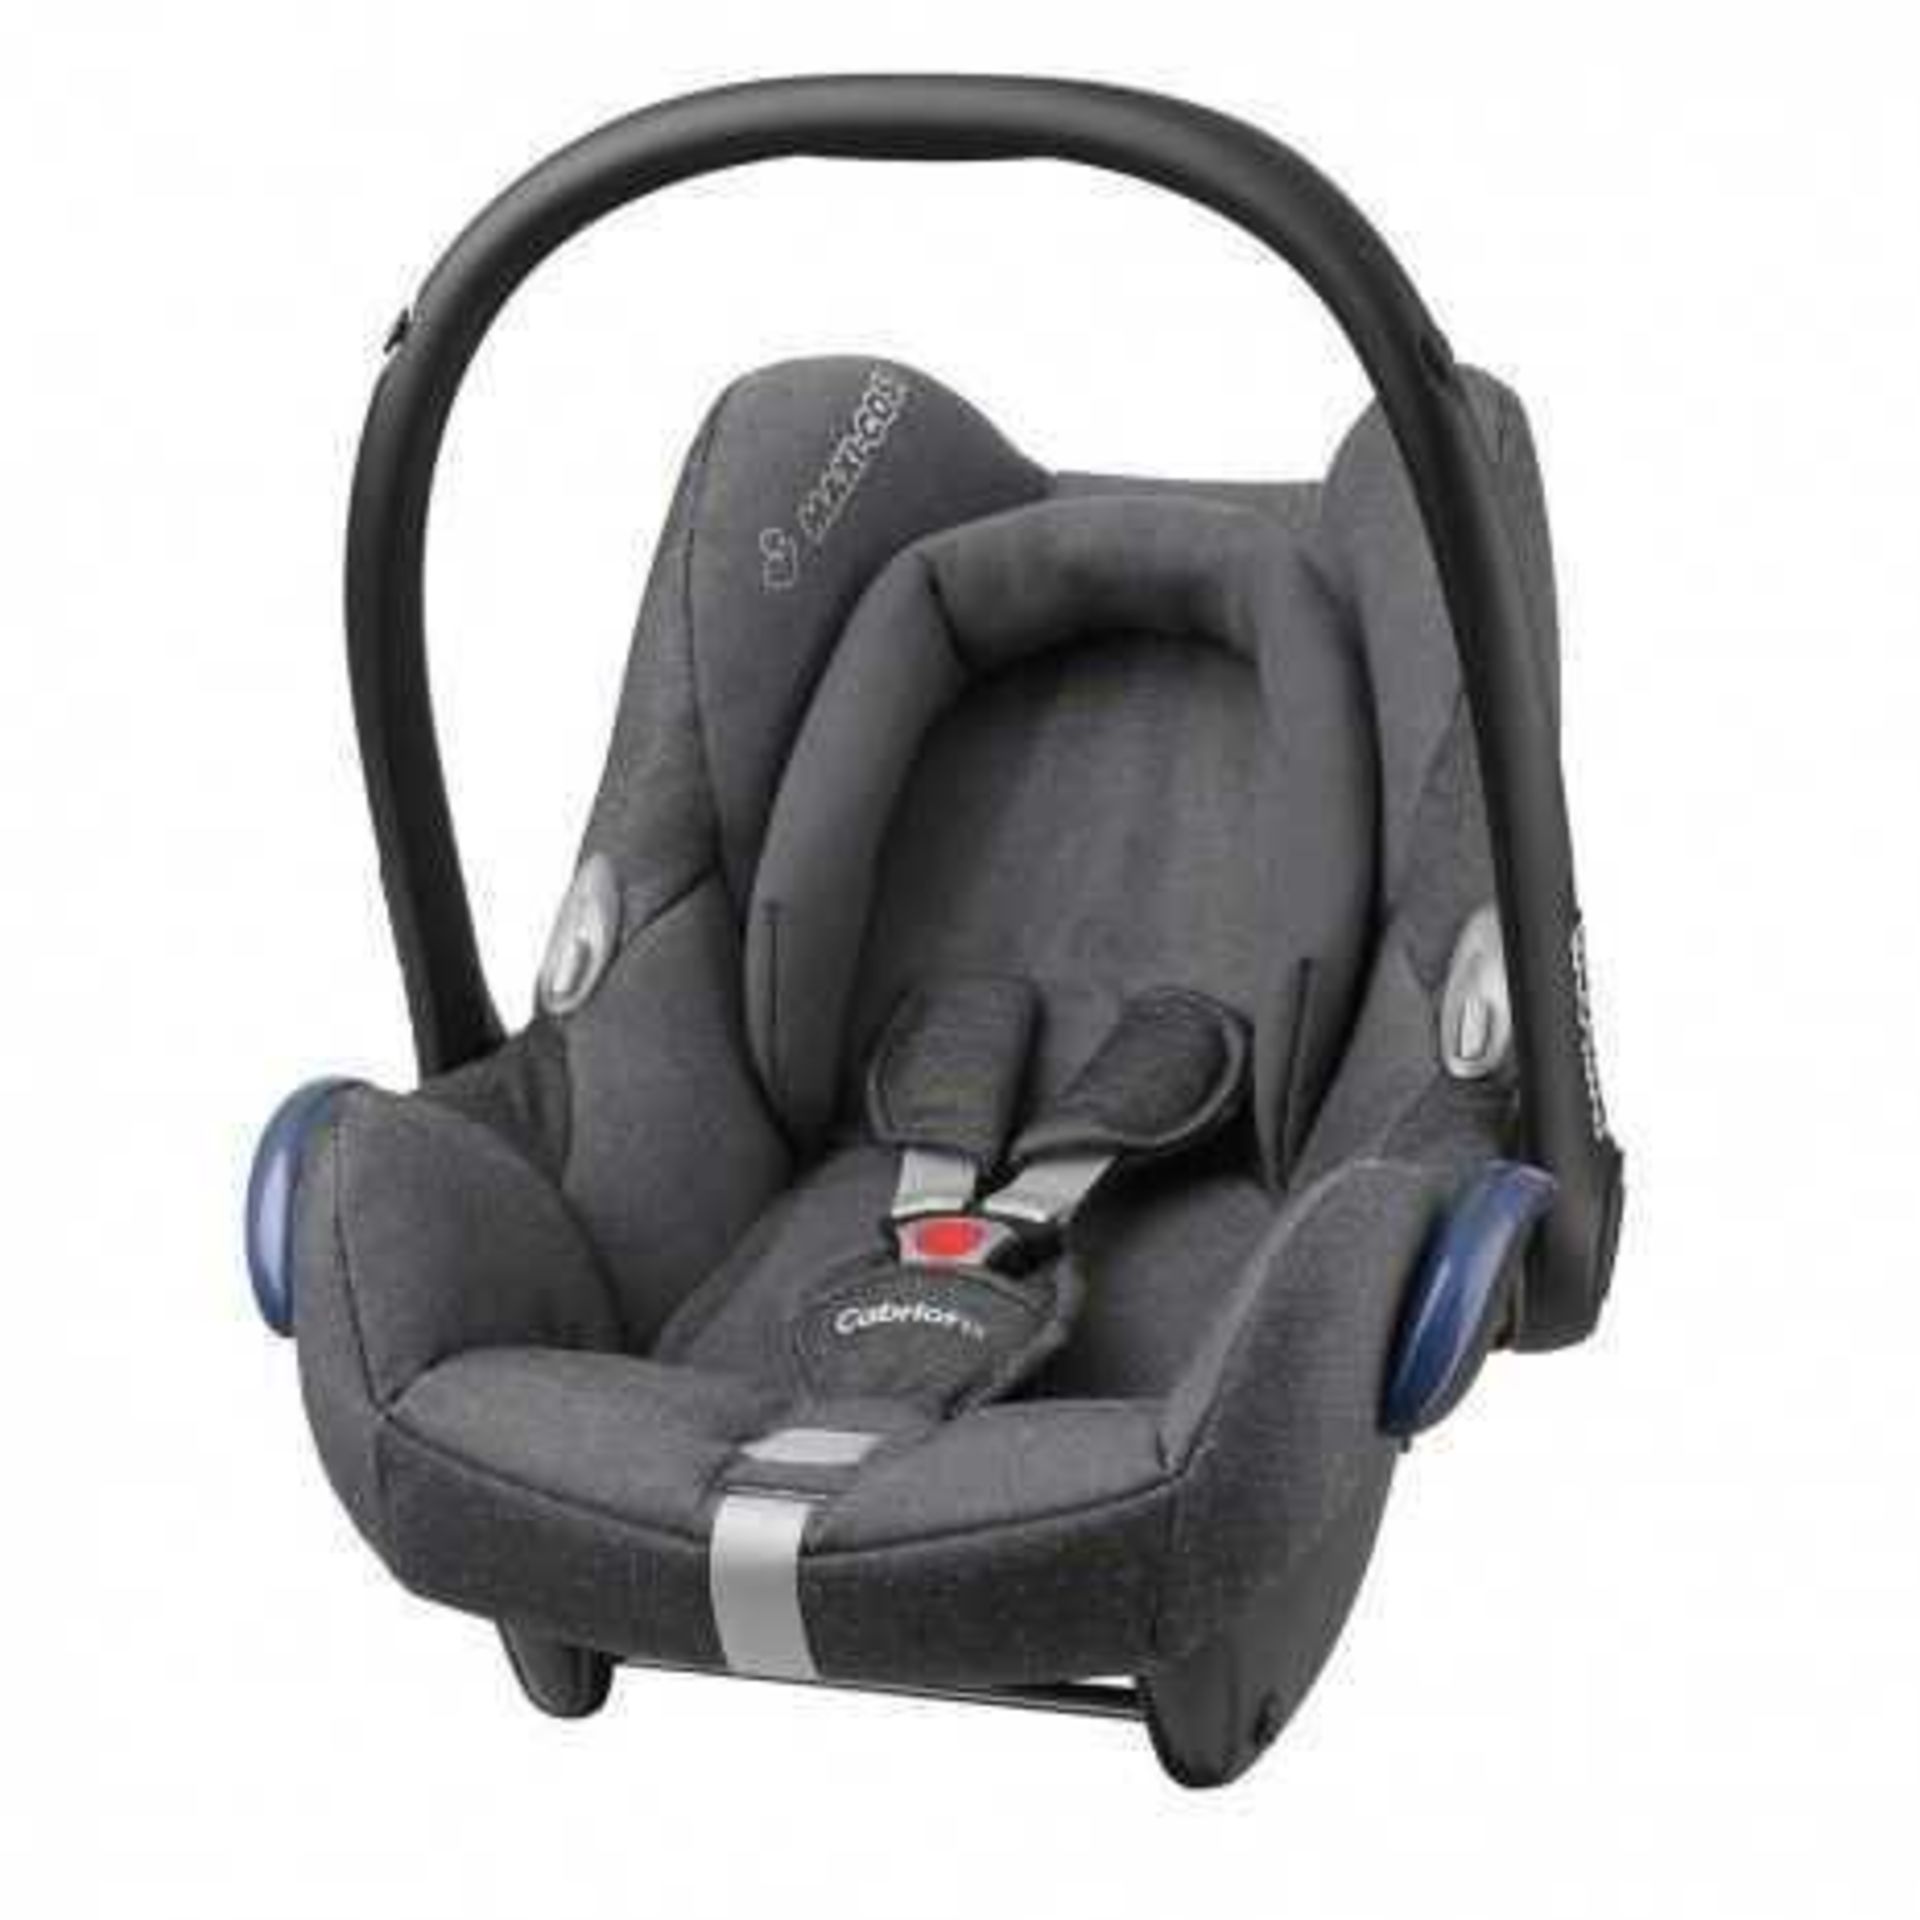 RRP £145 Unboxed Maxi-Cosi Cabriofix Baby Safety Car Seat